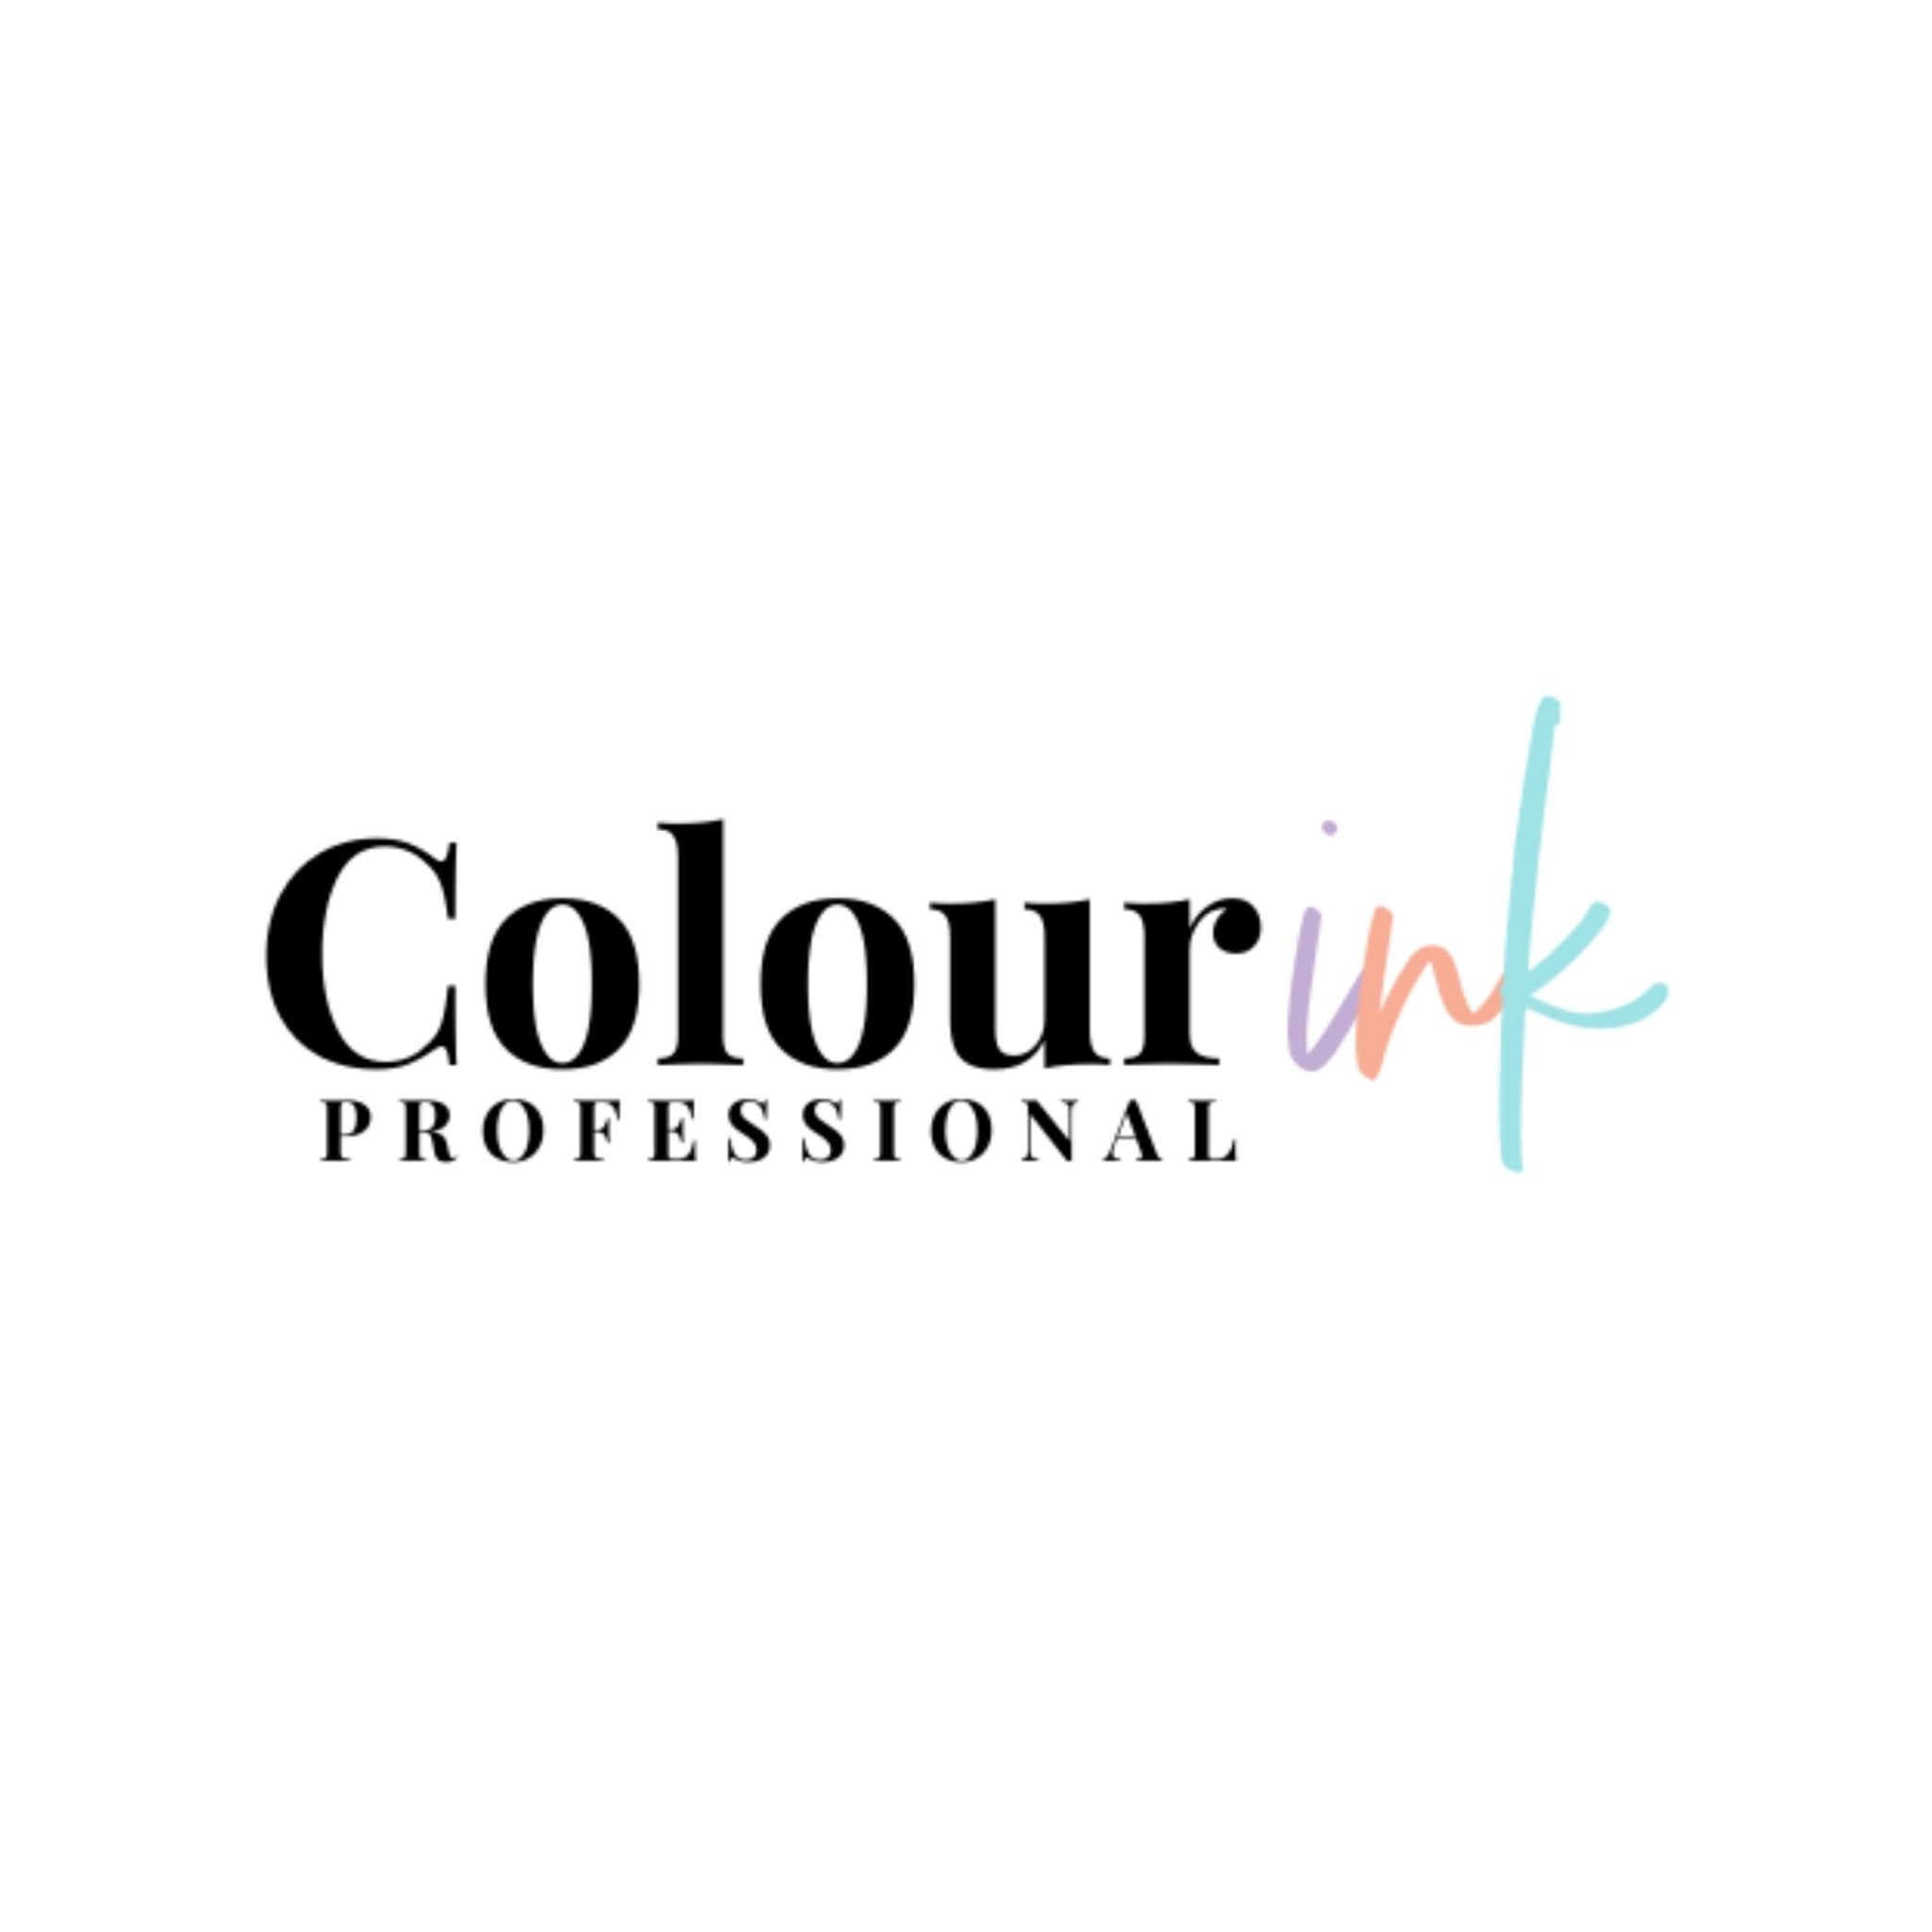 Colour Ink Professional Colour - HairBeautyInk